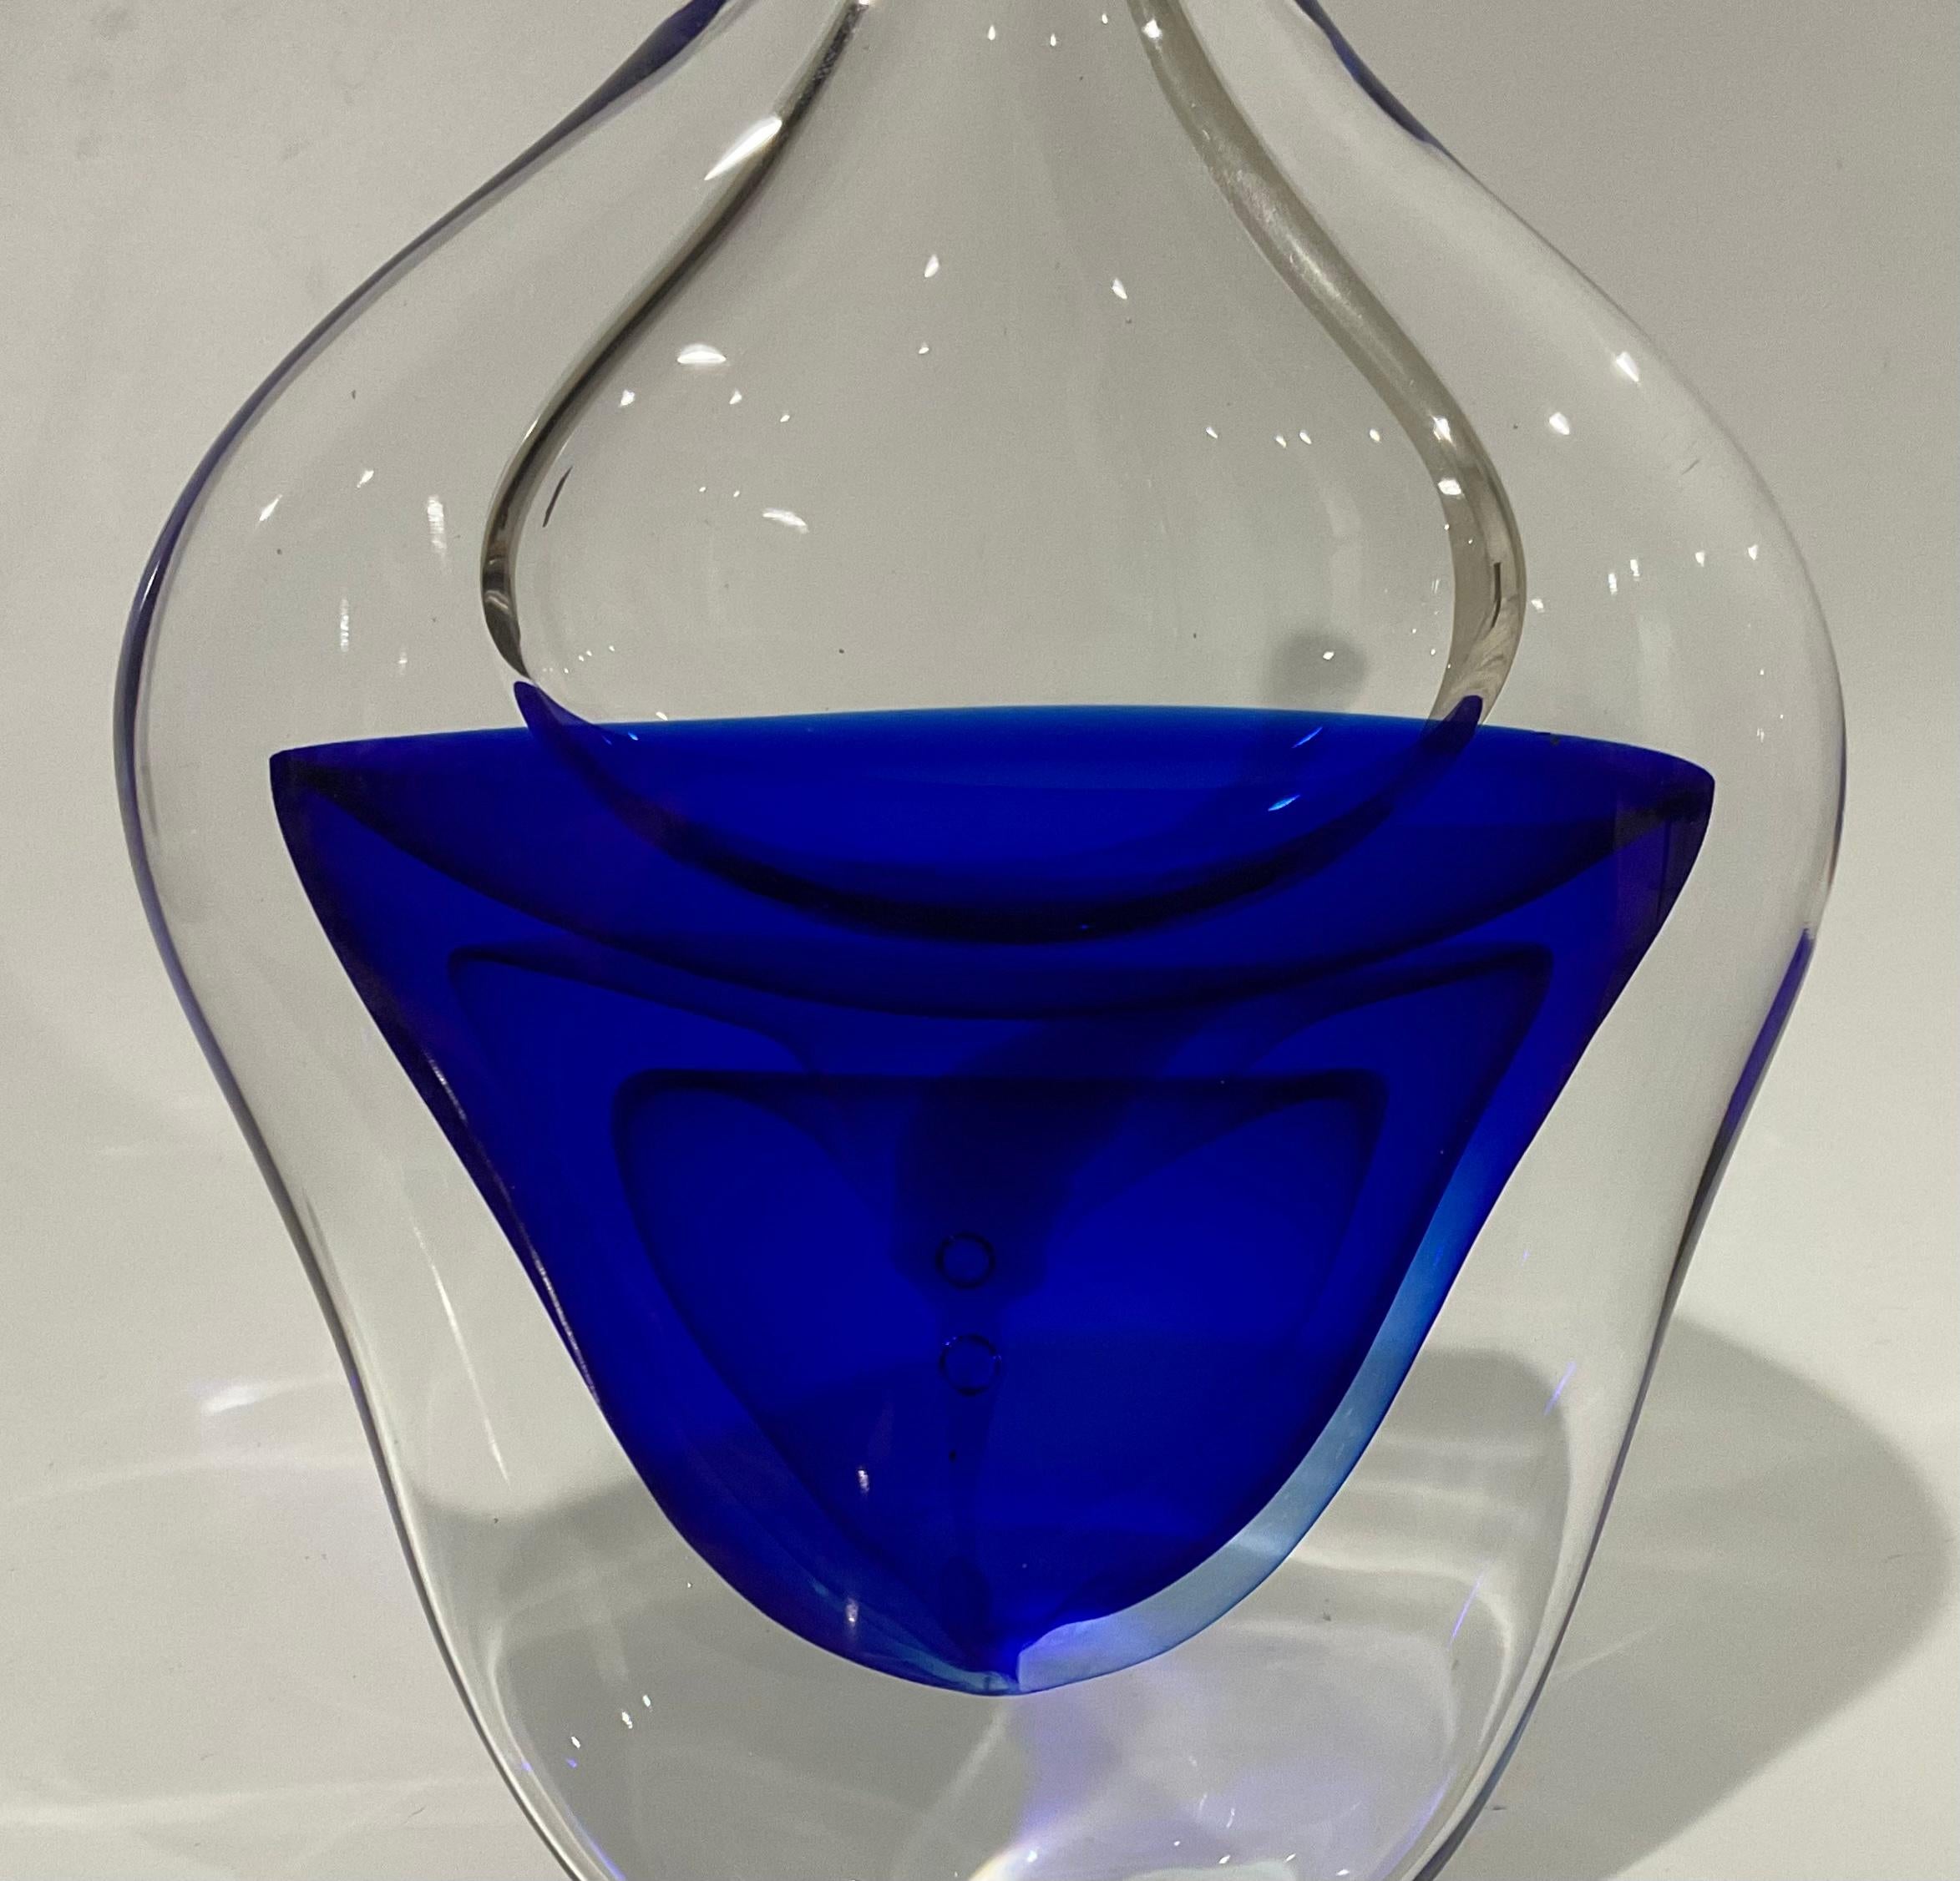 Antonio da Ros Signed Cenedese Murano glass vase circa 1960s factory signed in script on the bottom. The vase is circa 1960s. Multi layer blue encased in clear. Rare vase that stands alone in any interior or will enhance any collection.